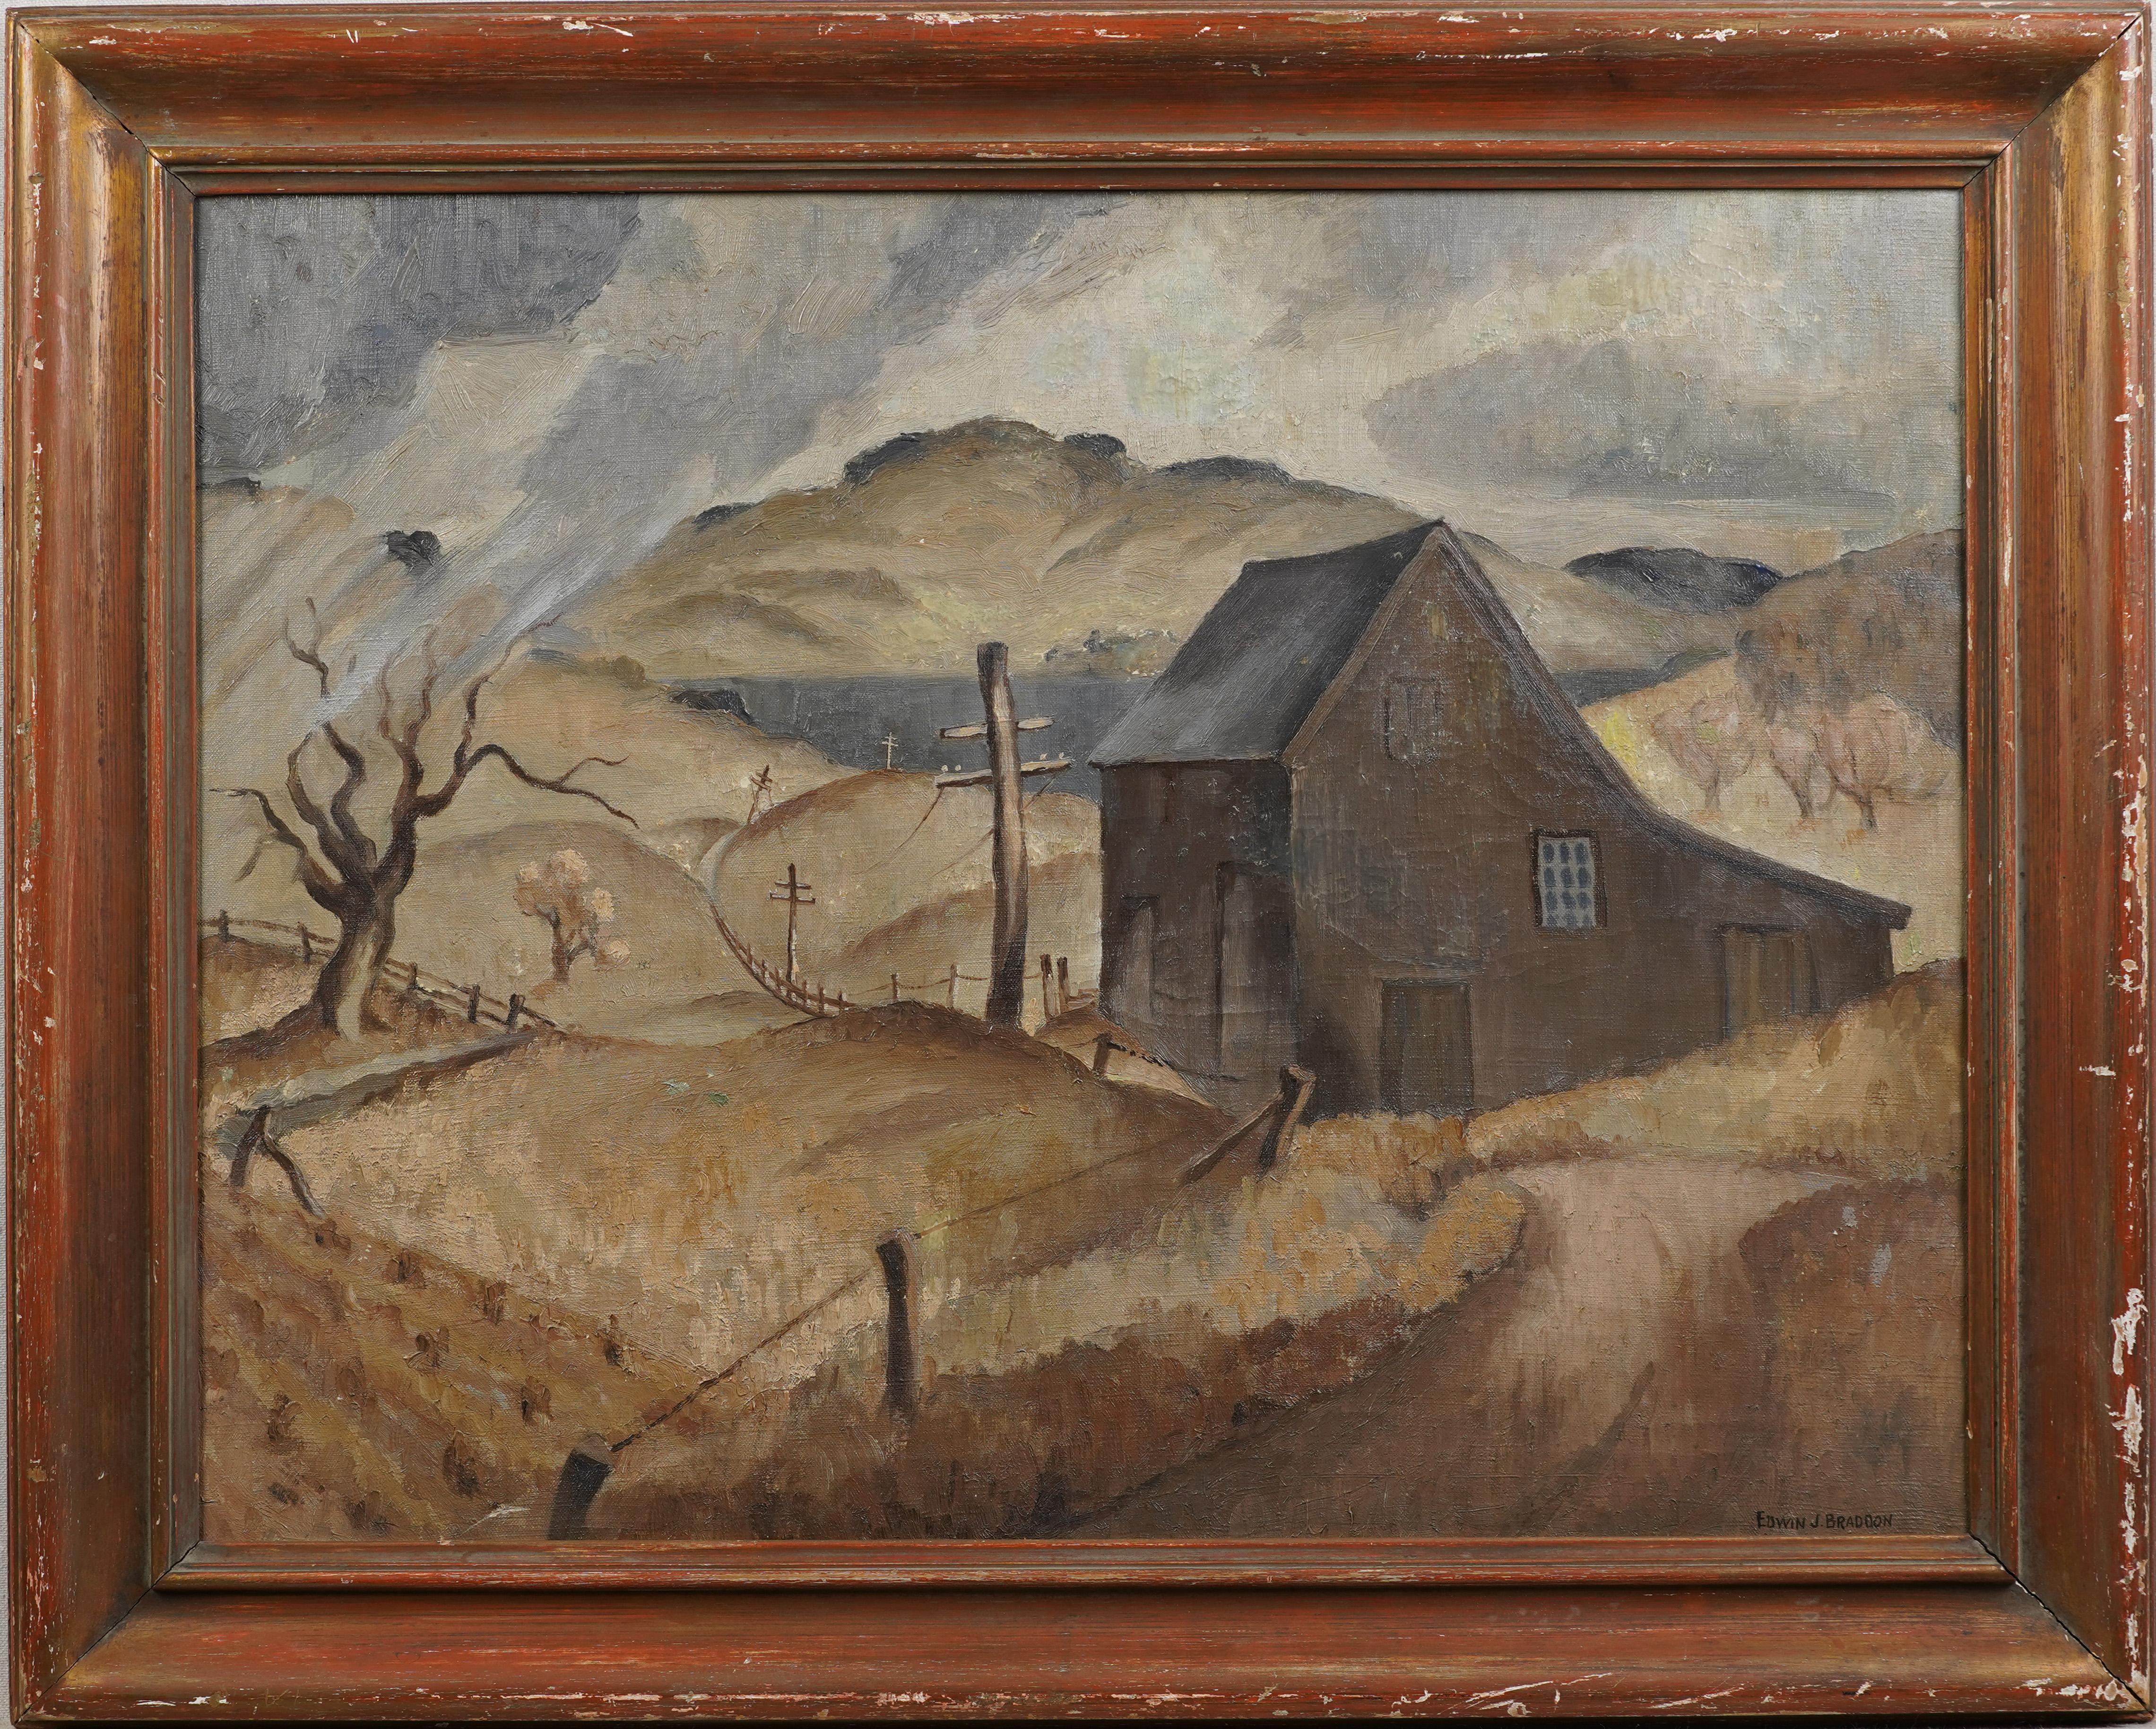 Unknown Landscape Painting - Signed American Regionalist Midwest "Storm in the Valley" Framed Landscape Oil